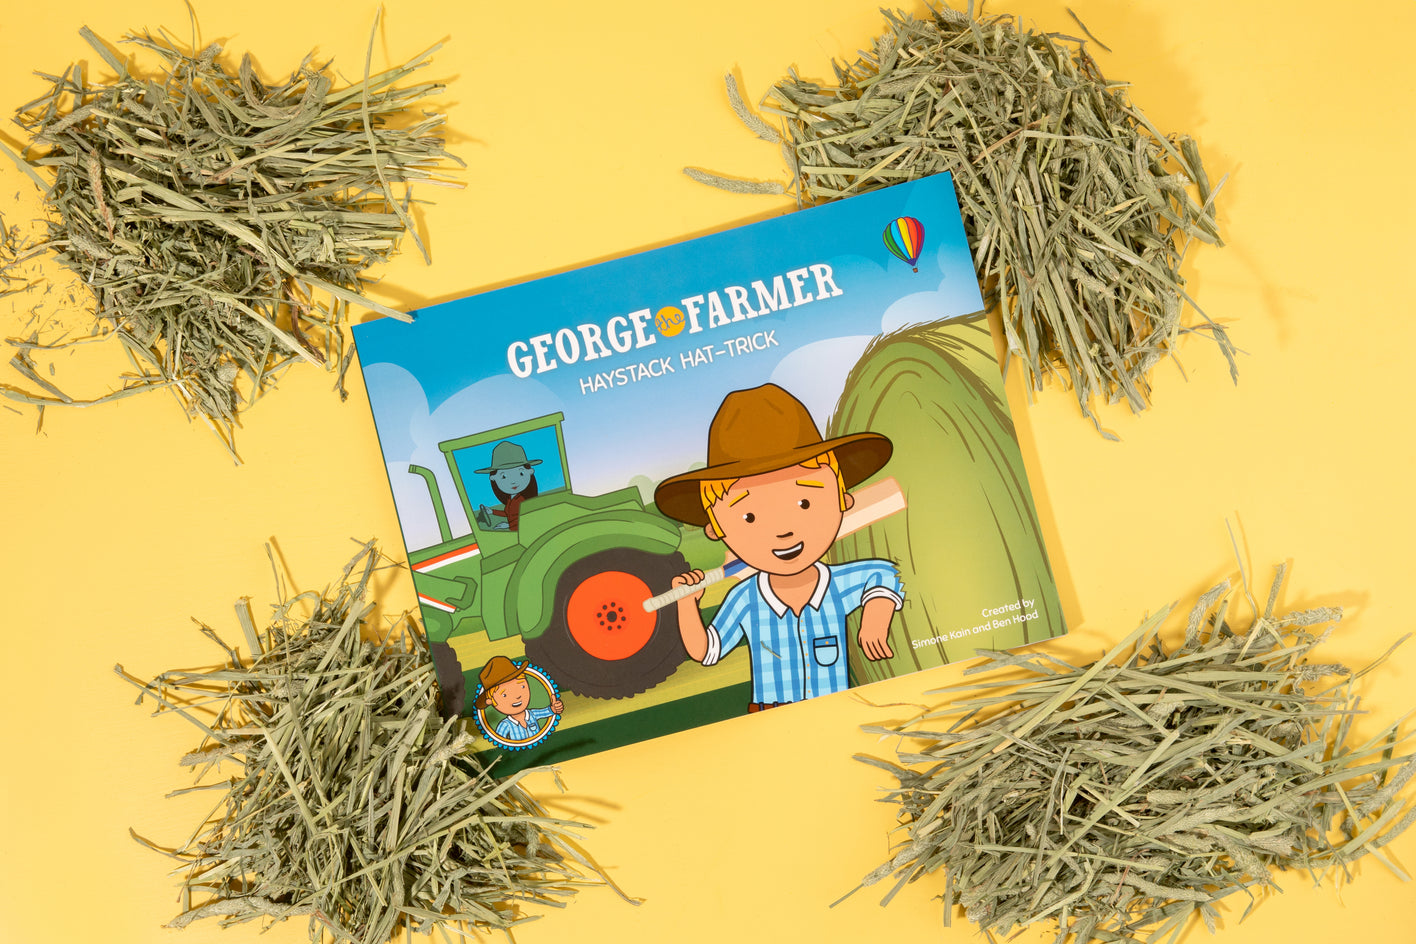 George the Farmer Haystack Hat-trick Picture Book